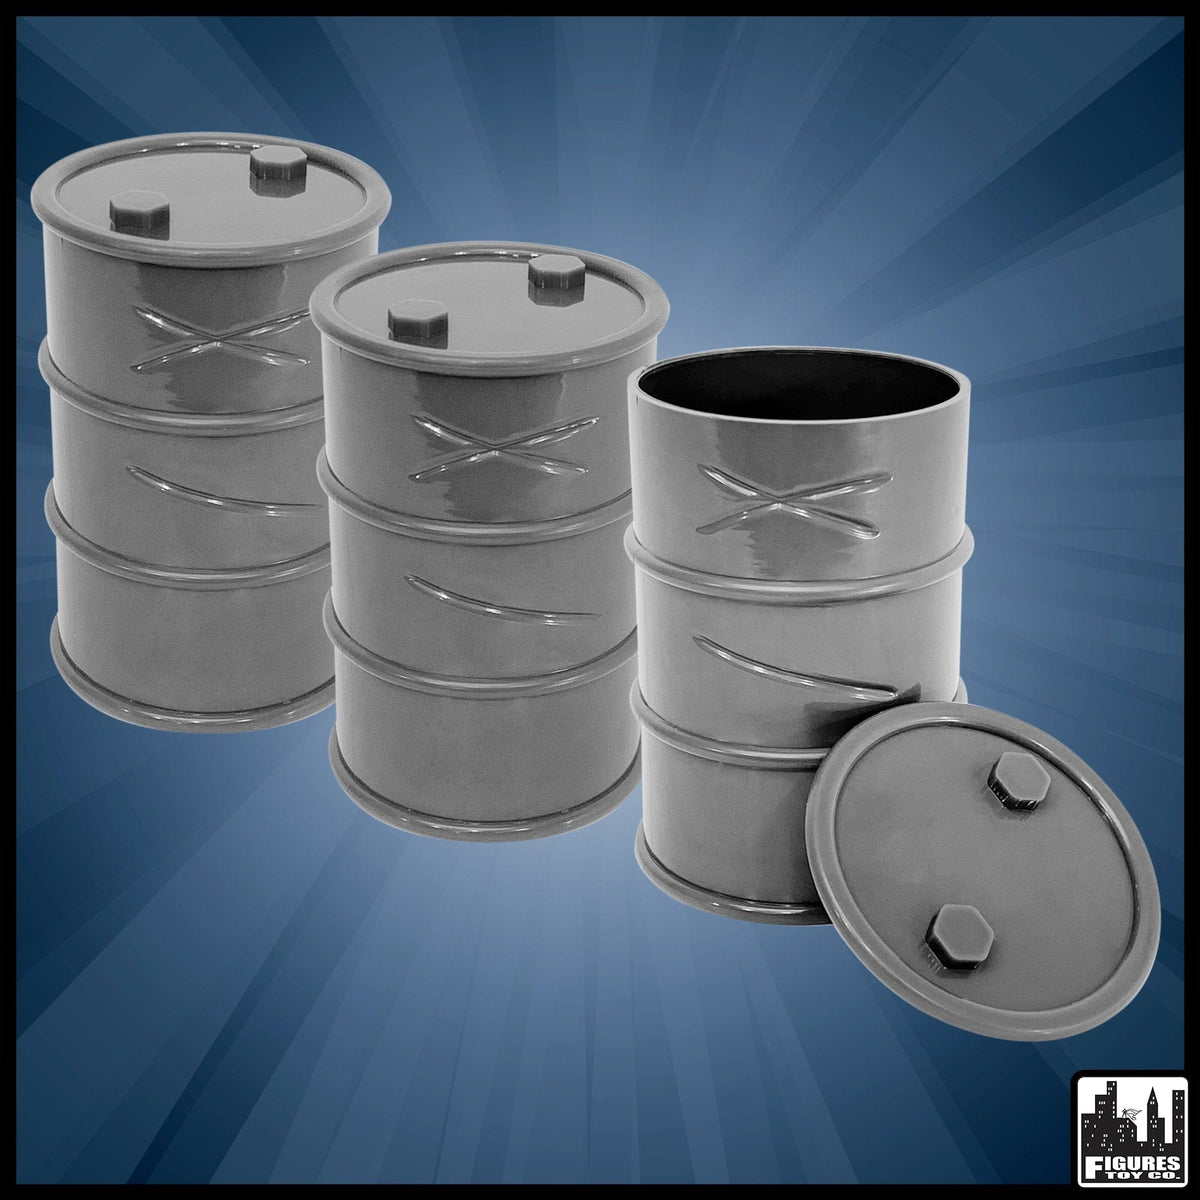 Set of 3 Gray Plastic Toy Oil Drums For WWE Wrestling Action Figures